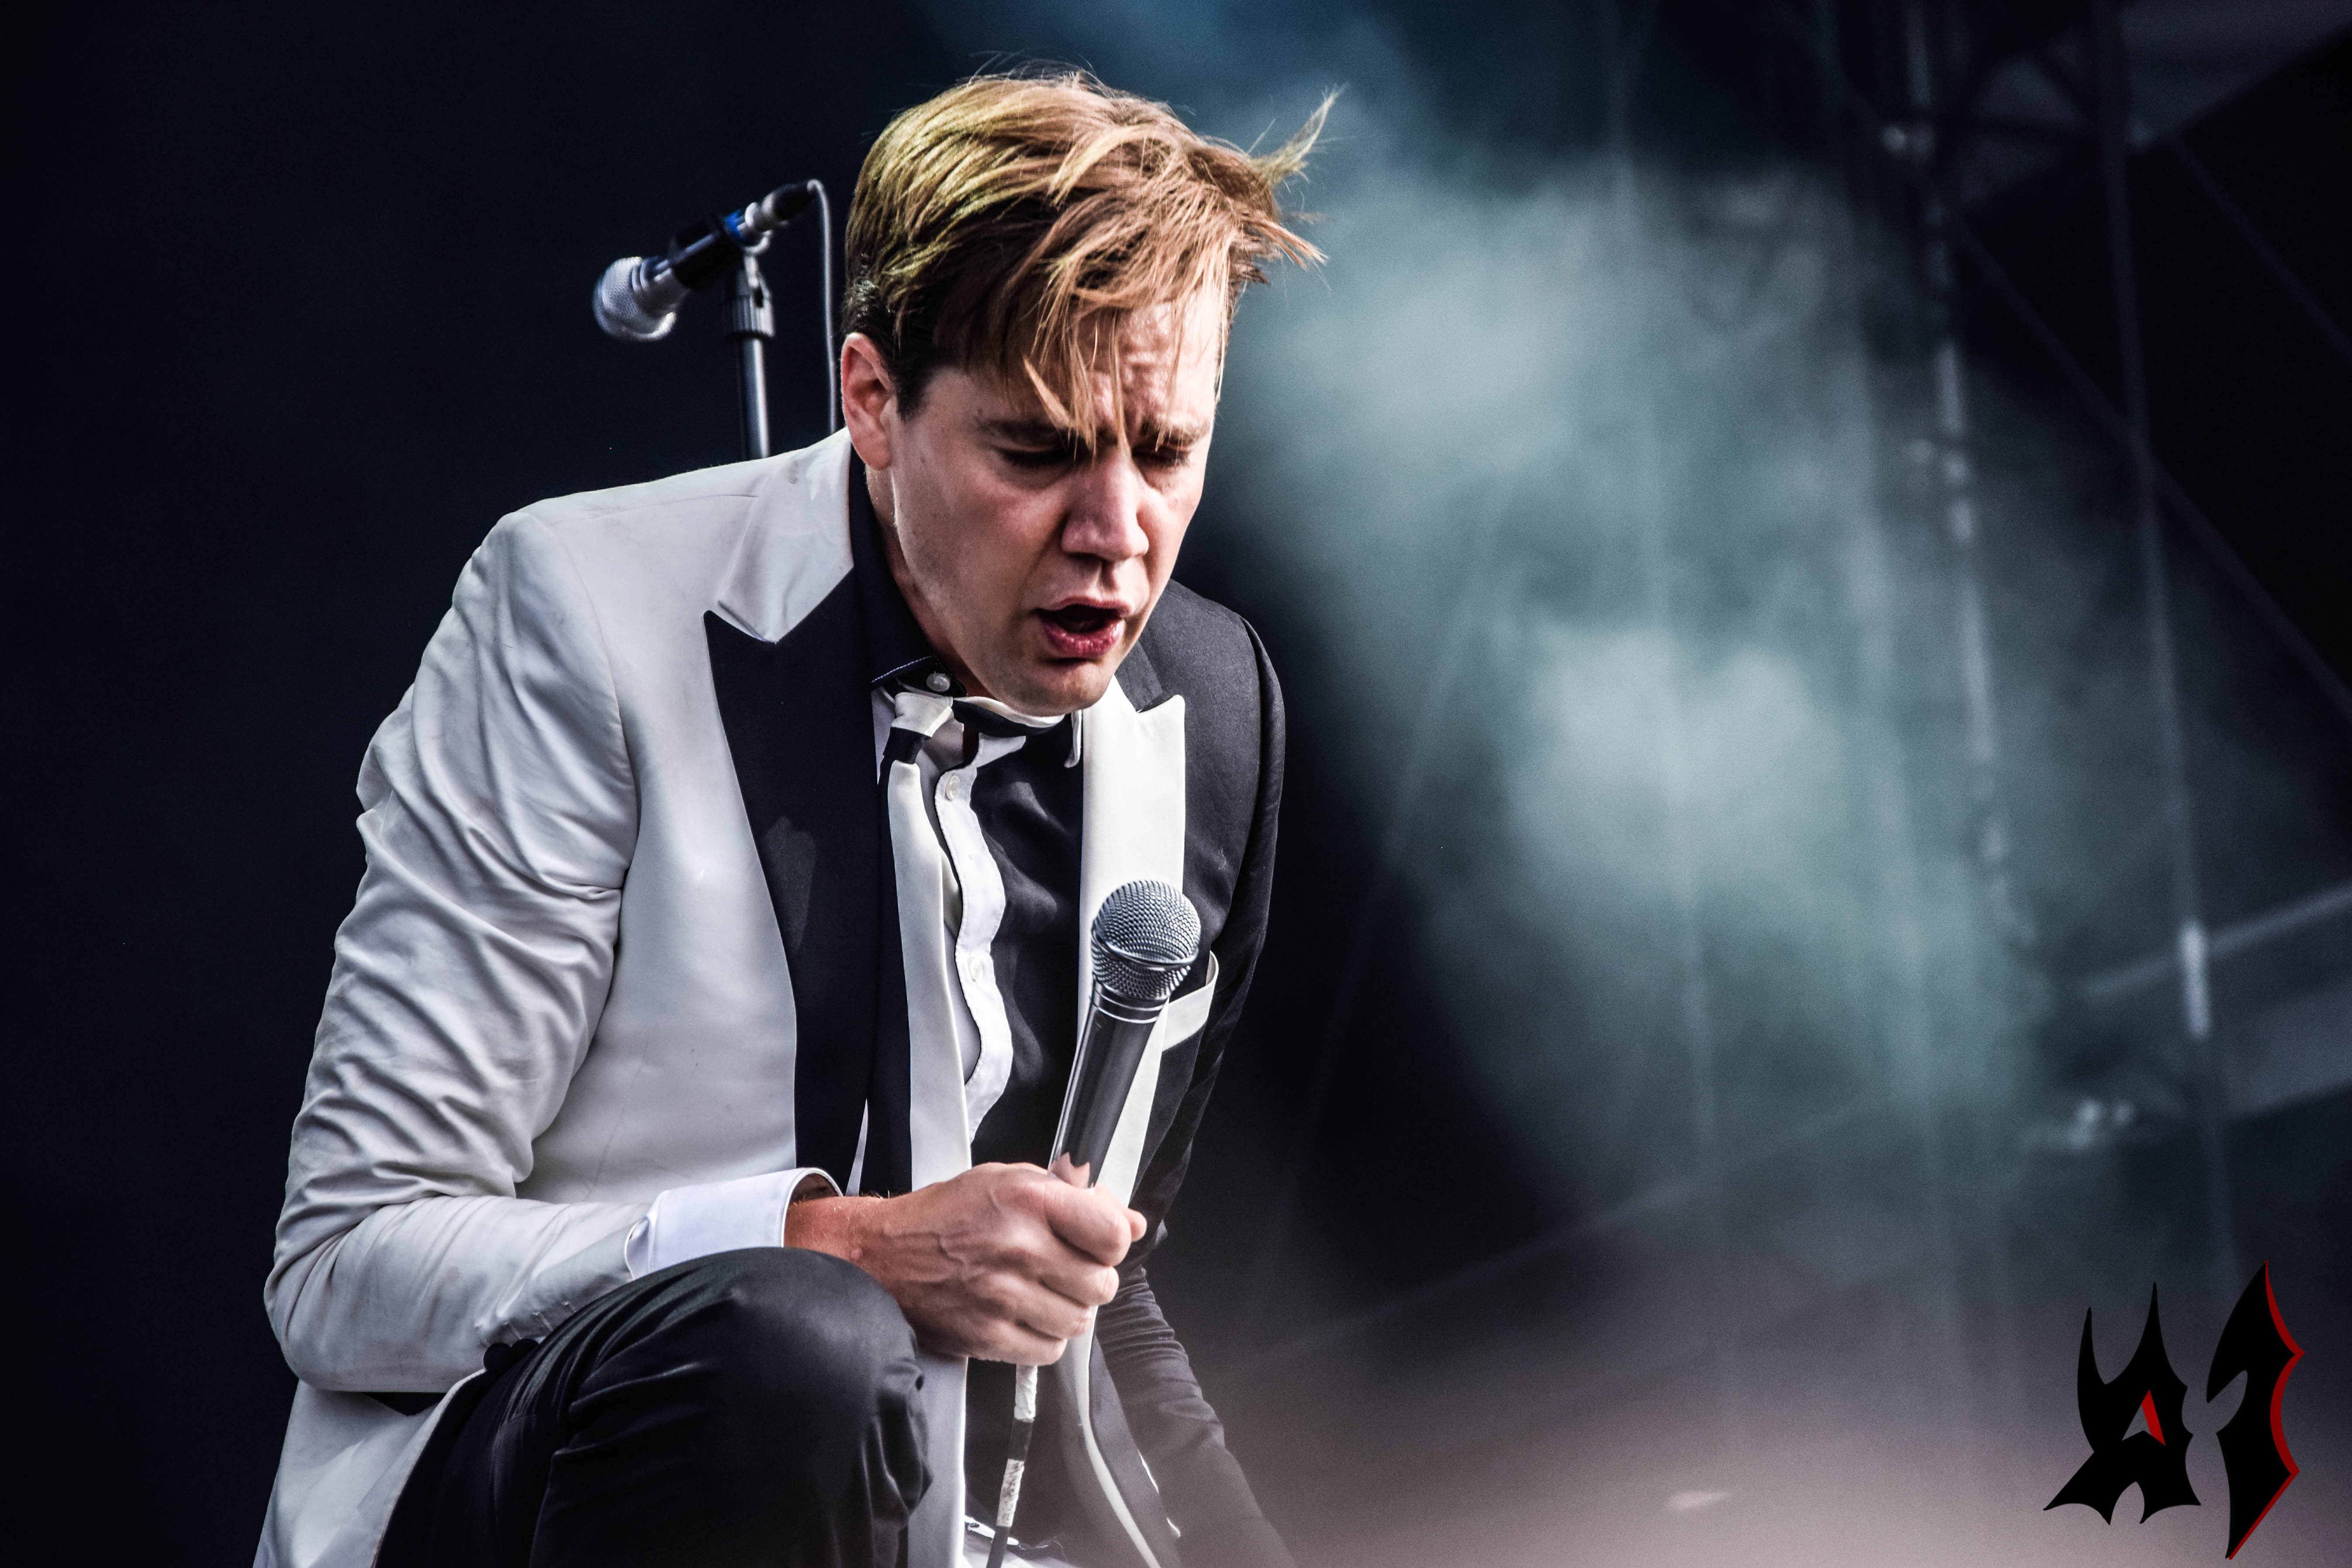 Donwload 2018 – Day 3 - The Hives 26